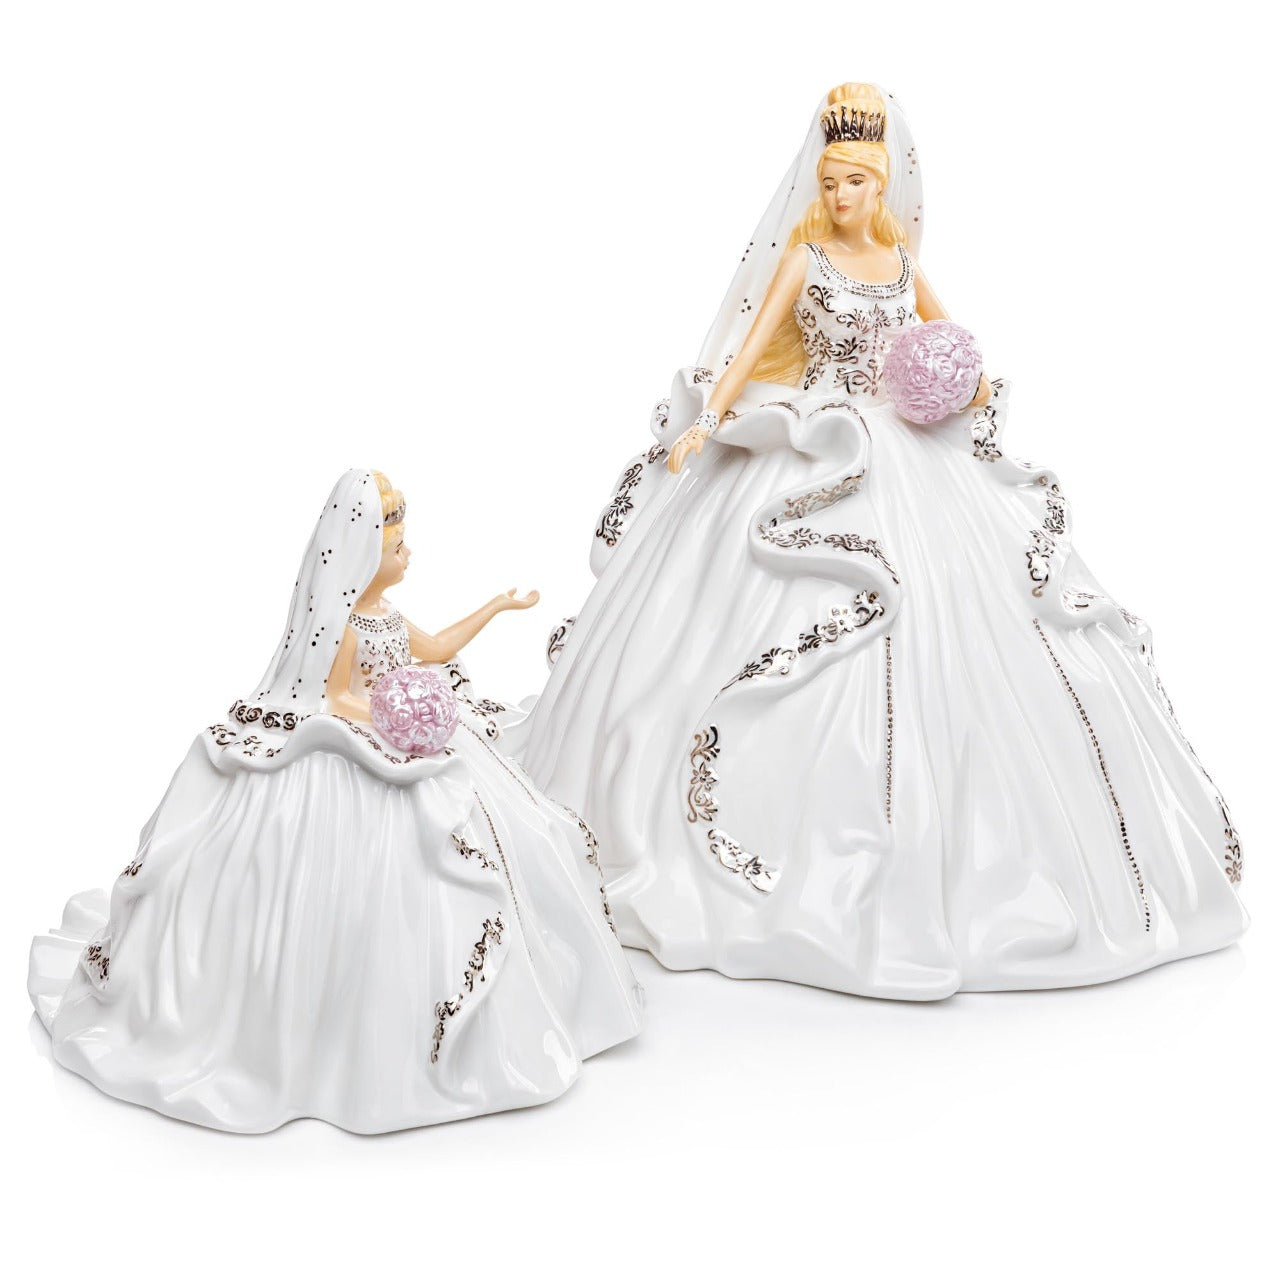 English Ladies Gypsy Affection Blonde  Gypsy Affection is the latest edition to the range and comes in both blonde and brunette and also in mini-figures. This gorgeous figurine stands out from the crowd with stunning gold details throughout the dress and on her beautiful crown.